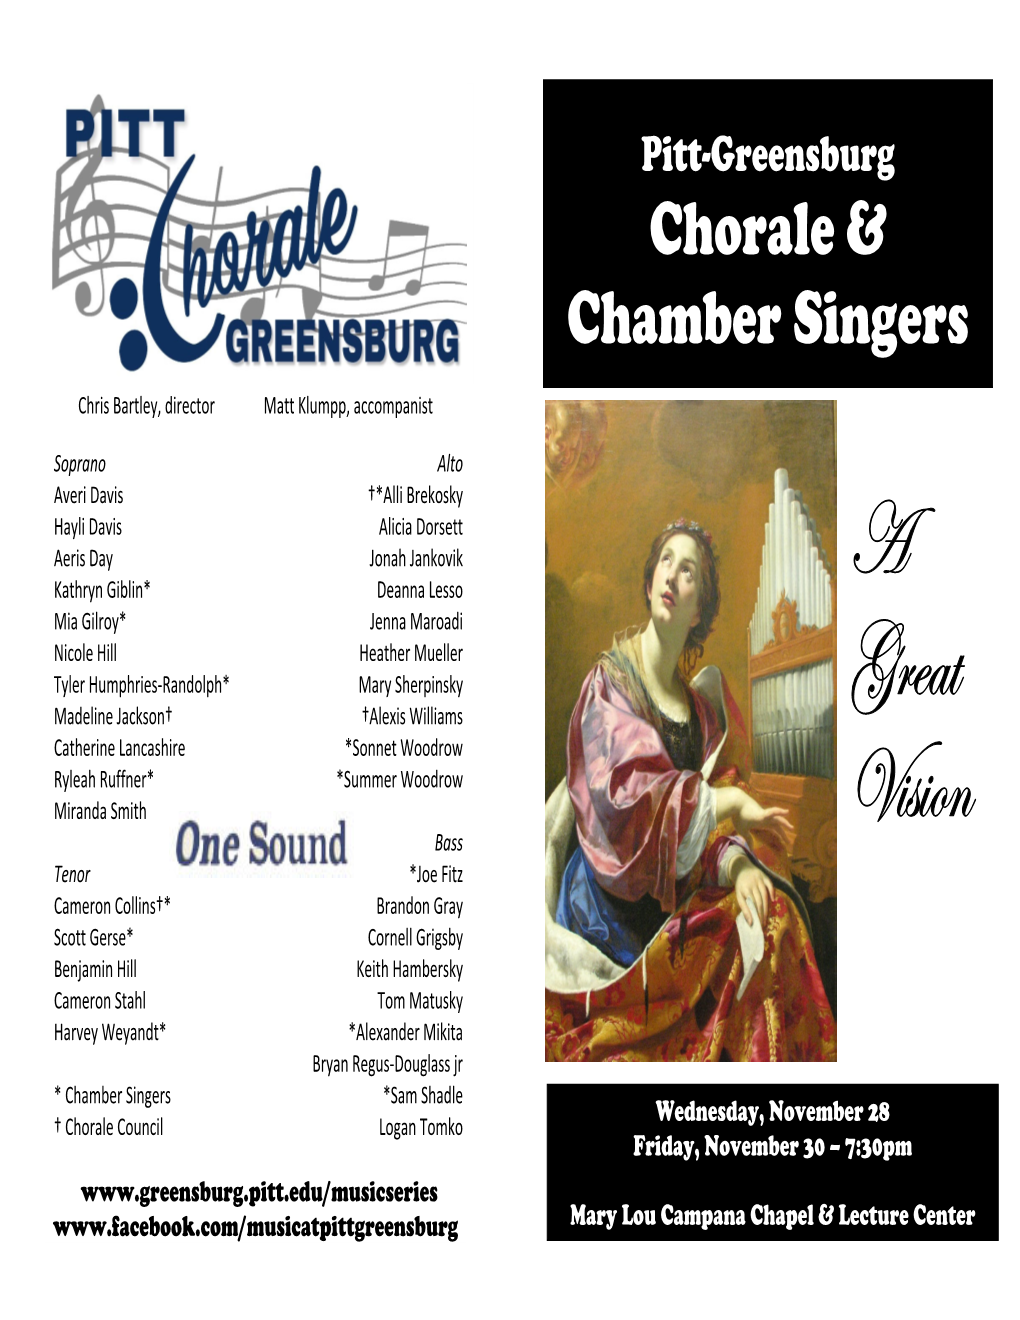 Chorale & Chamber Singers